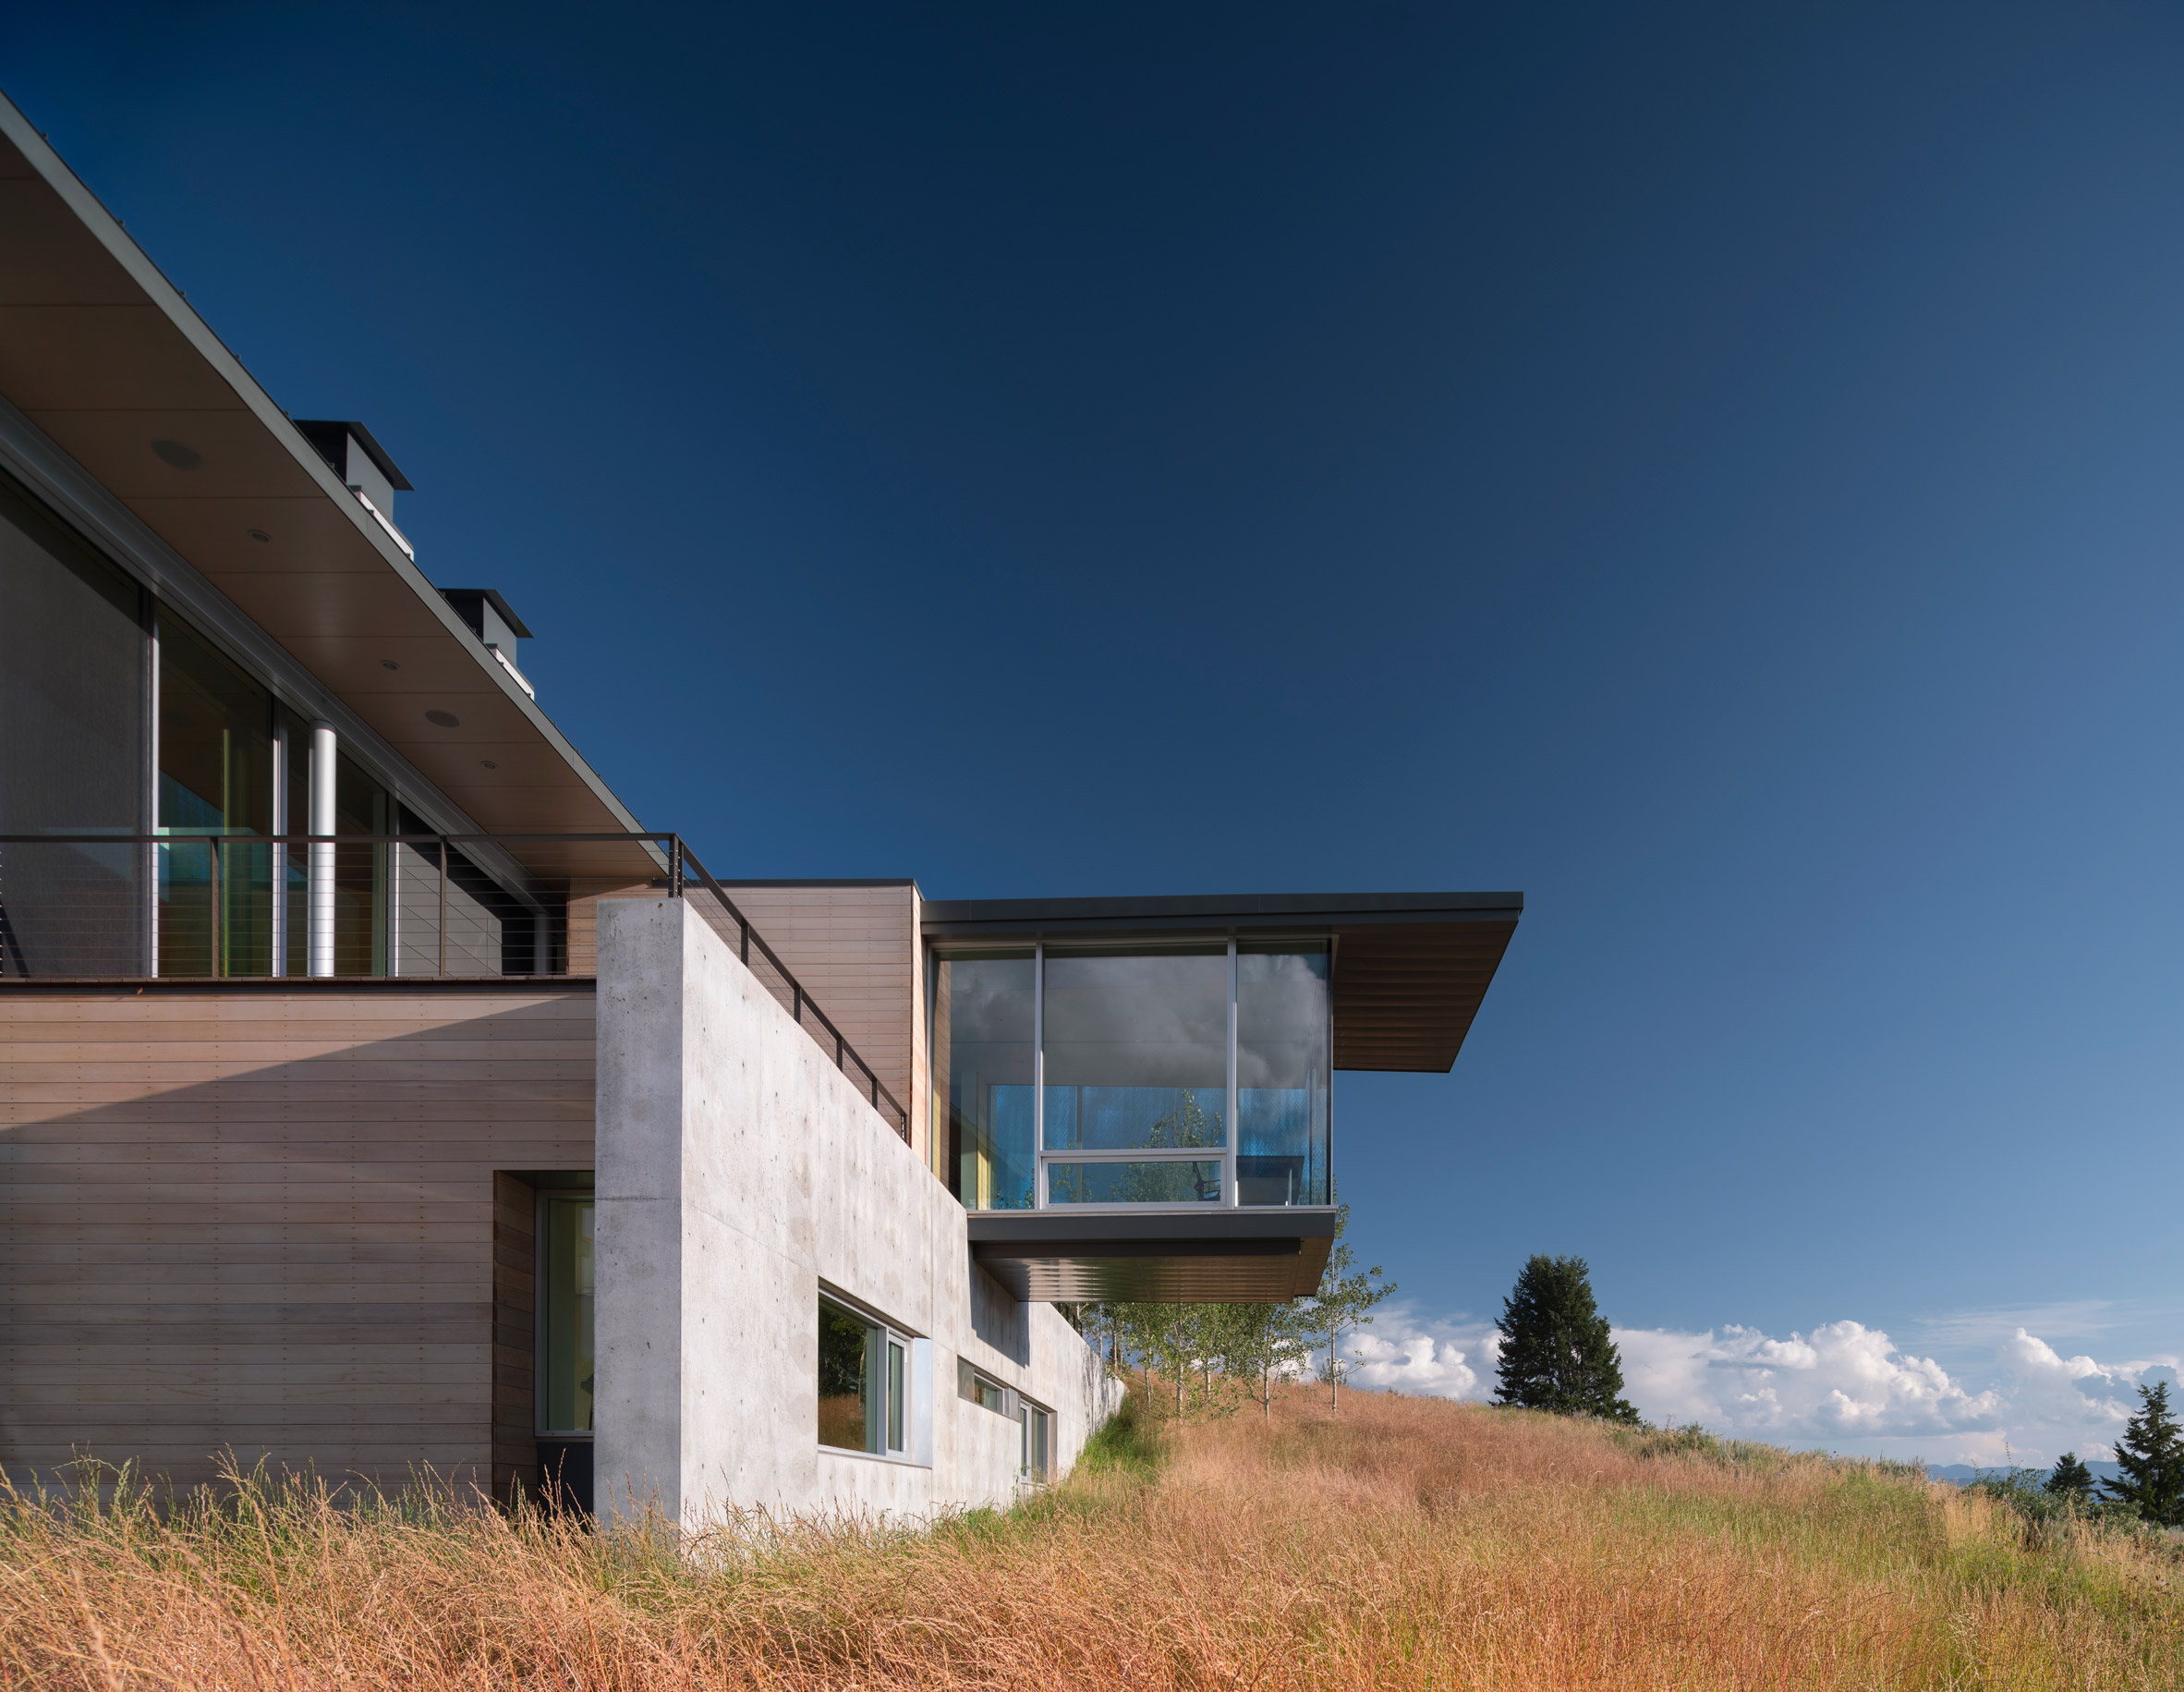 Glass study extends from hilltop home in Wyoming by Bohlin Cywinski Jackson